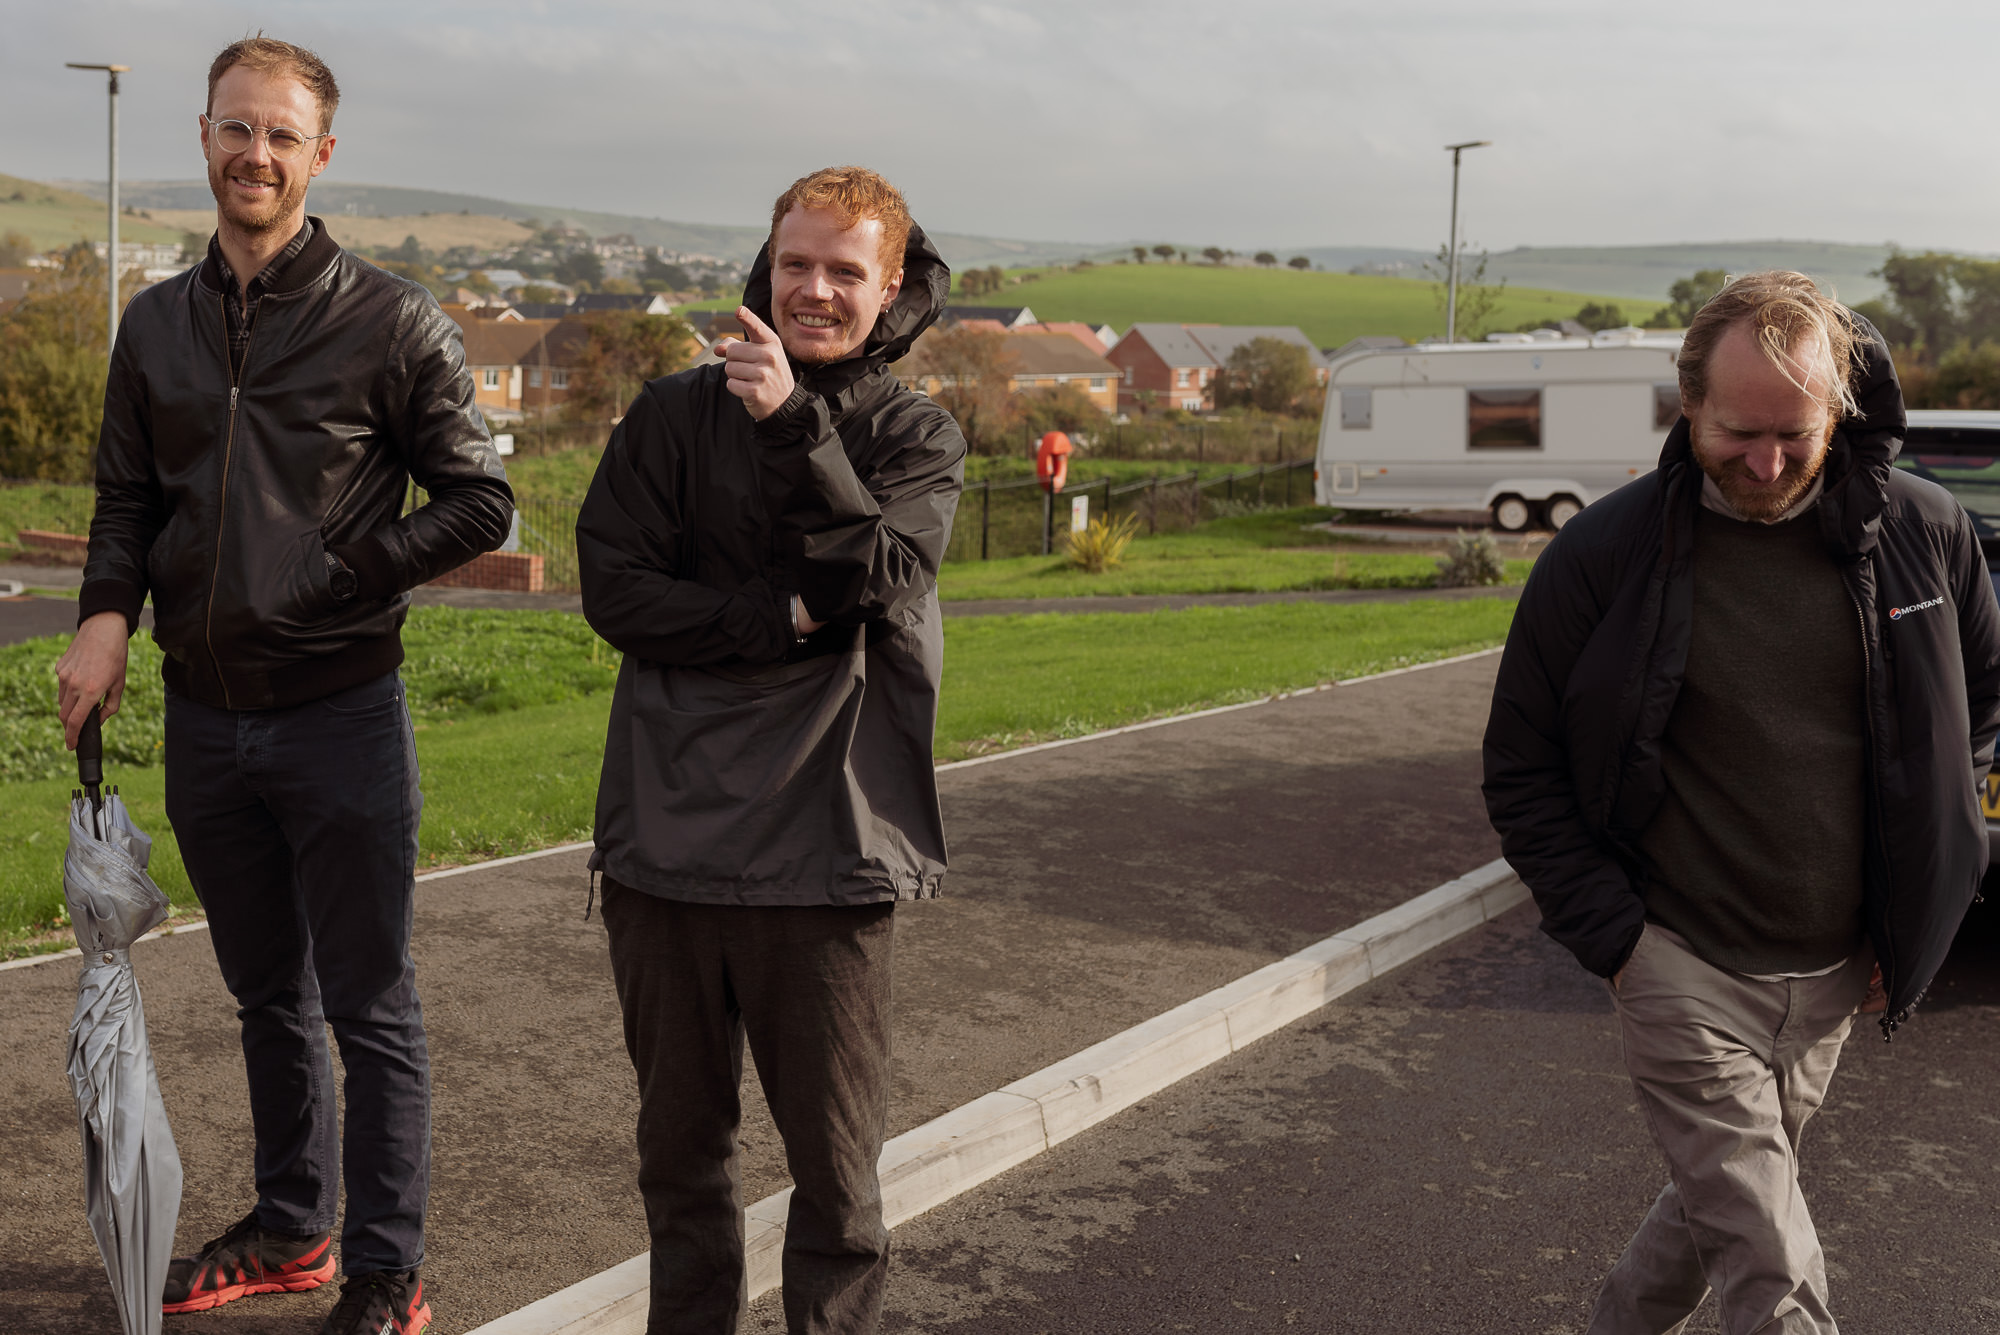 Three men on a site visit. One has an umbrella, one is pointing. There are hills and a caravan in the background.